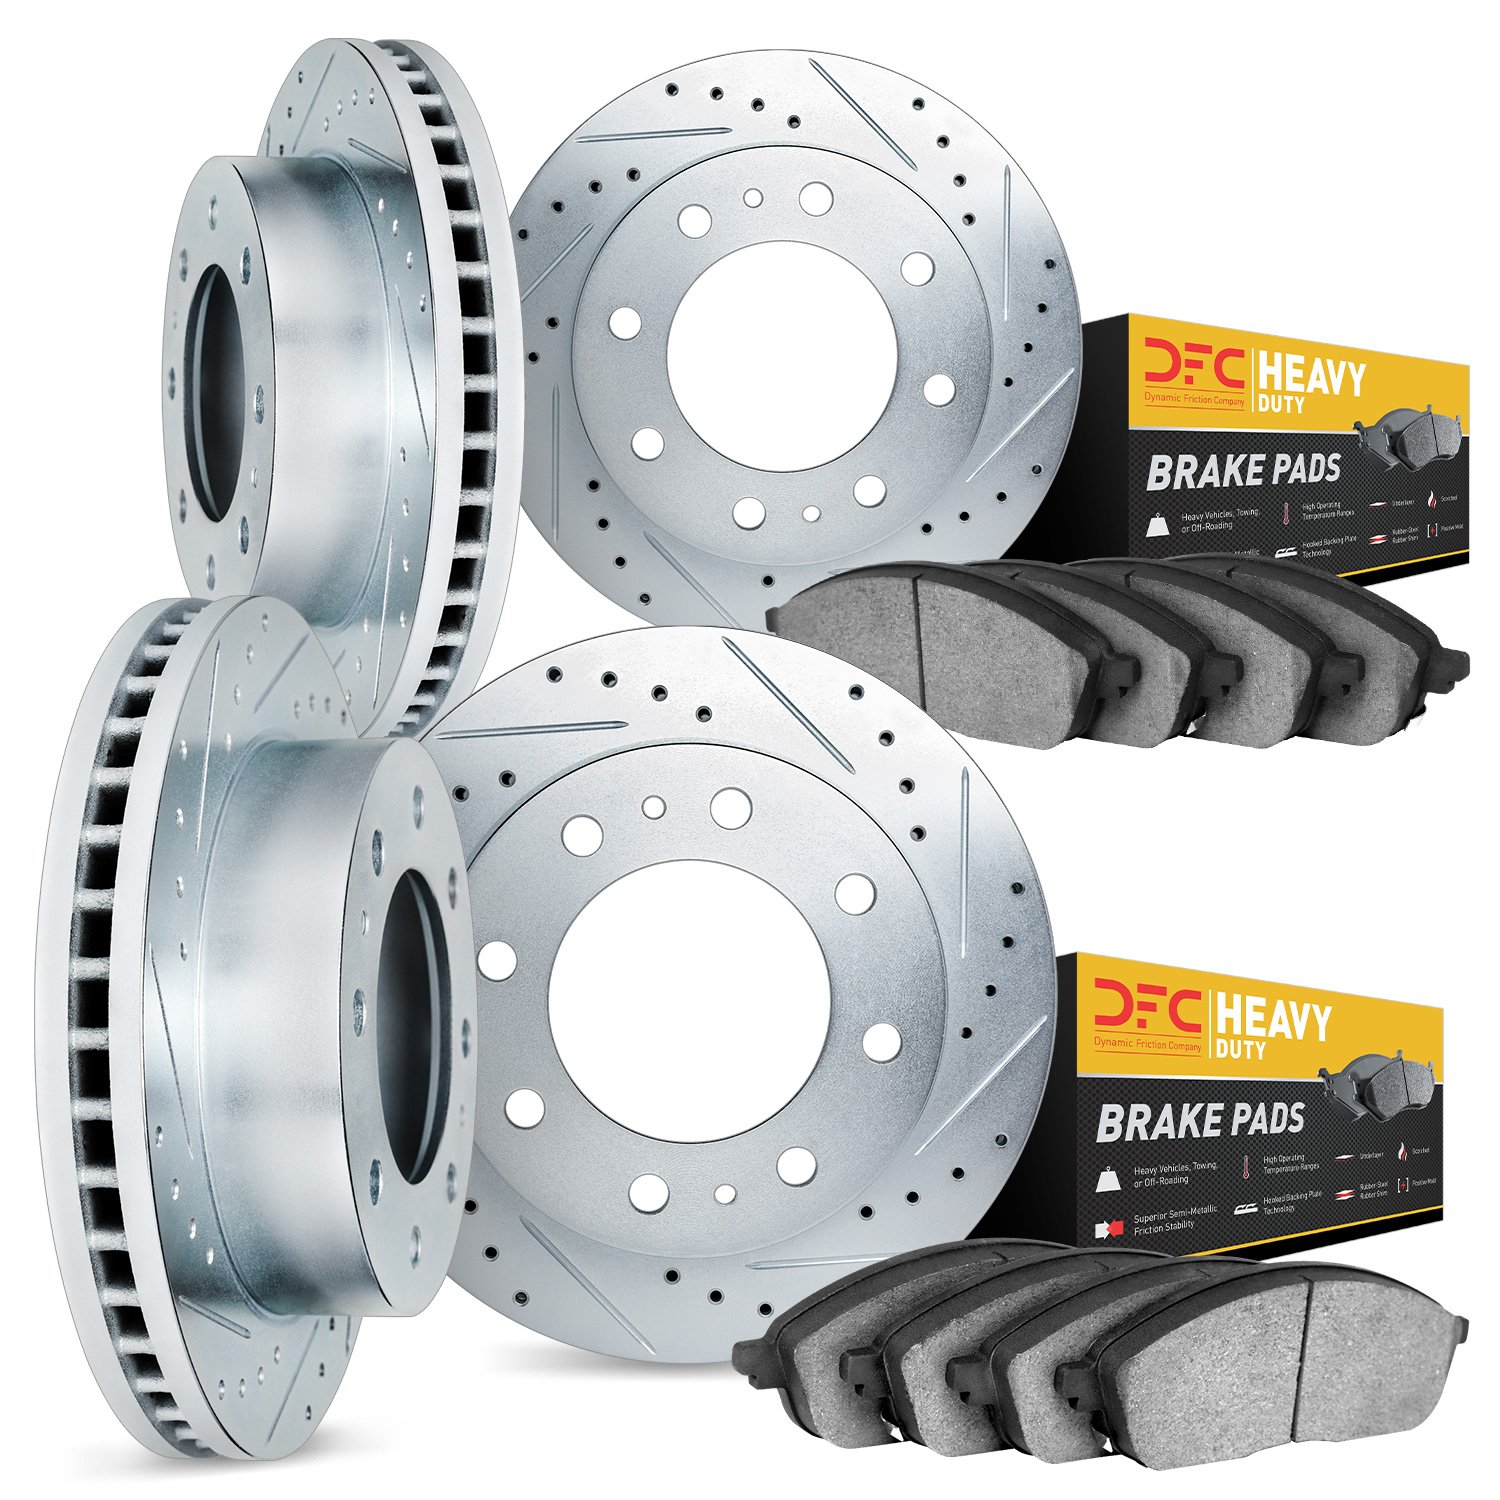 7204-99095 Drilled/Slotted Rotors w/Heavy-Duty Brake Pads Kit [Silver], 2006-2010 Ford/Lincoln/Mercury/Mazda, Position: Front an